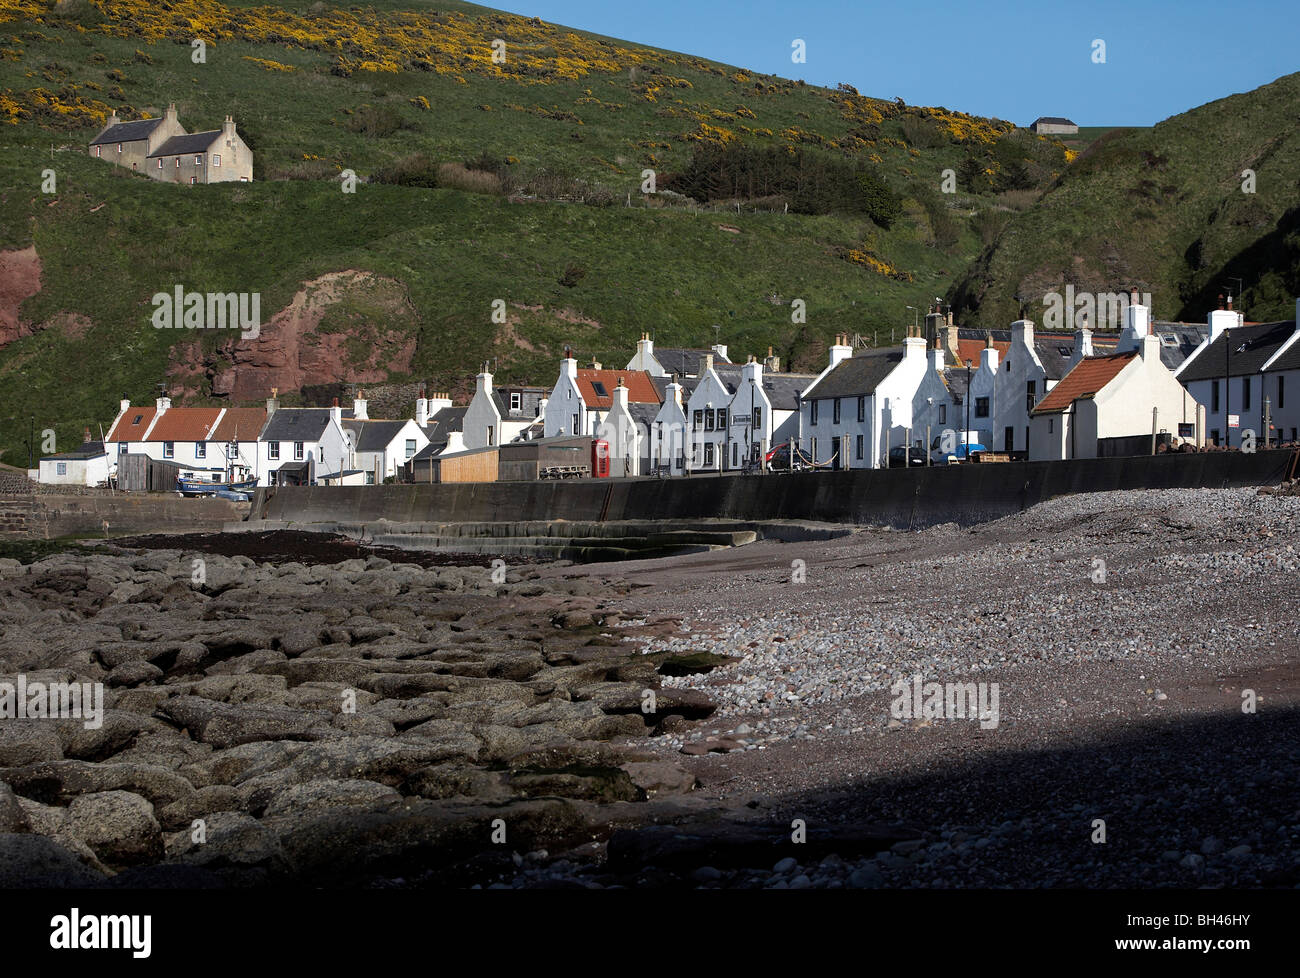 Pennan village on the Banff coast; formally a fishing village, now famous as a location for the film Stock Photo